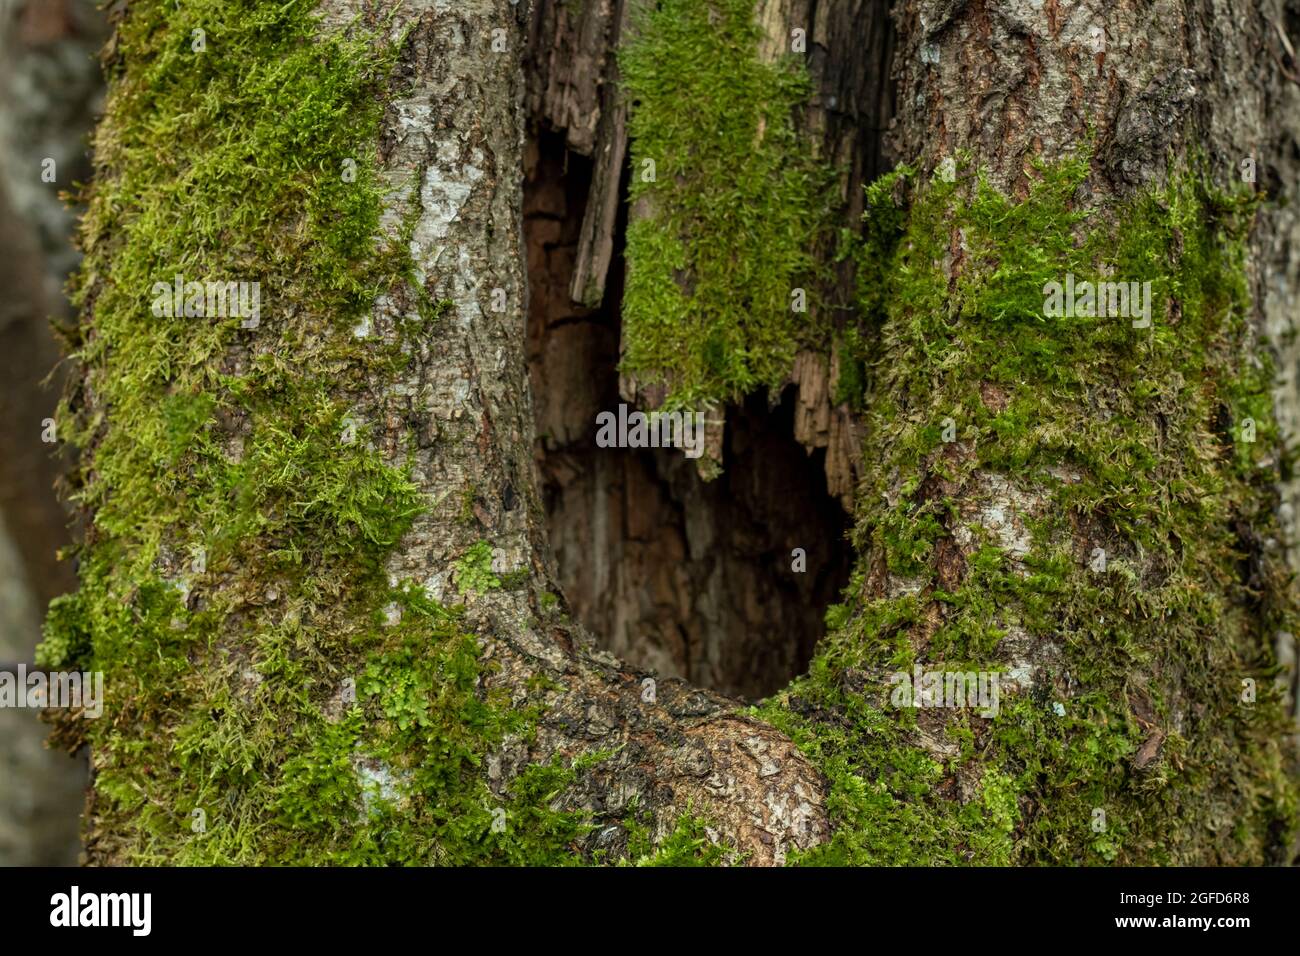 Hollow tree close-up, animal lives, nature photography. Stock Photo